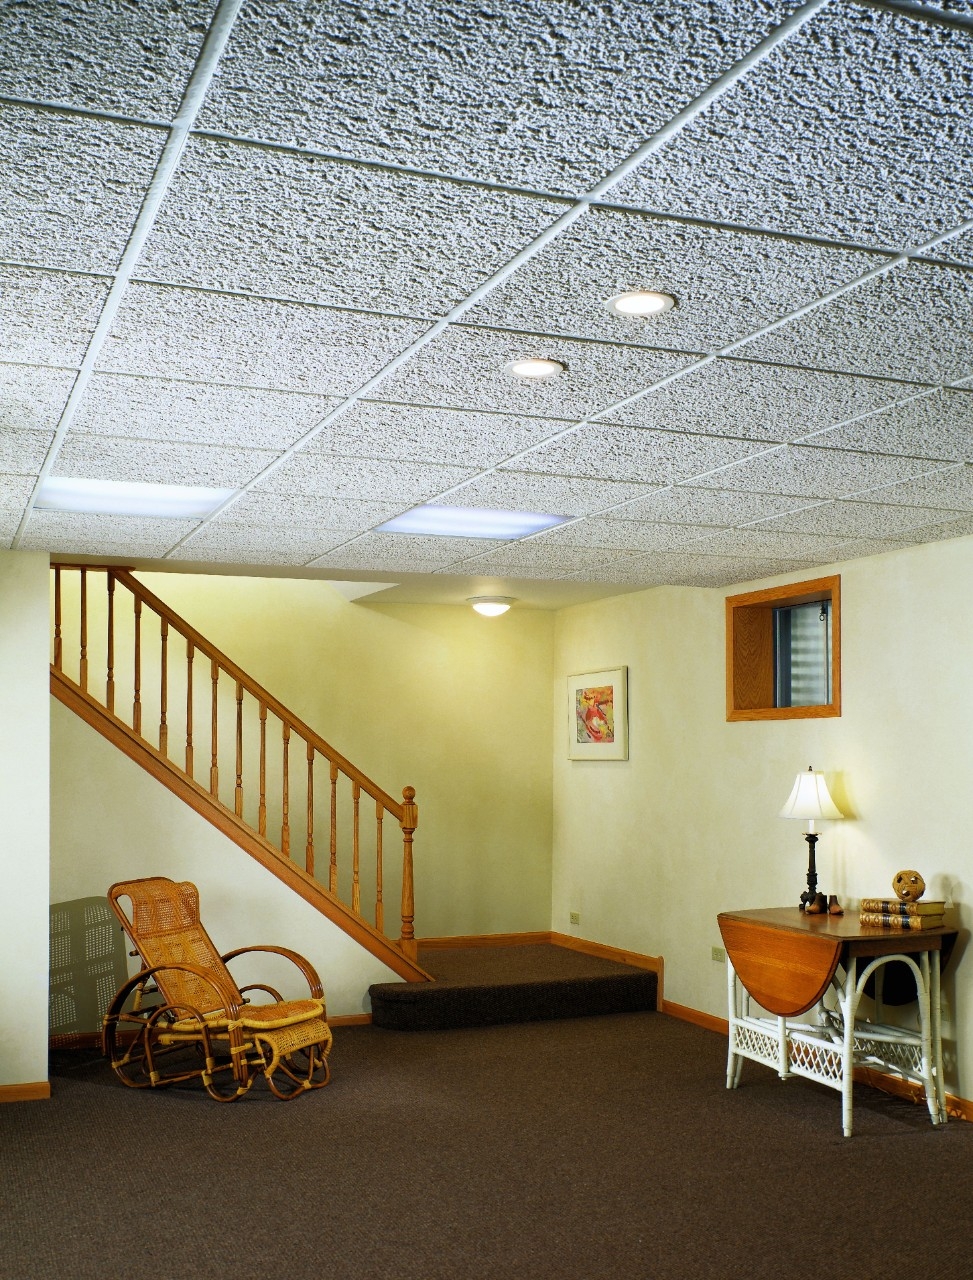 Permalink to Stucco Over Ceiling Tiles